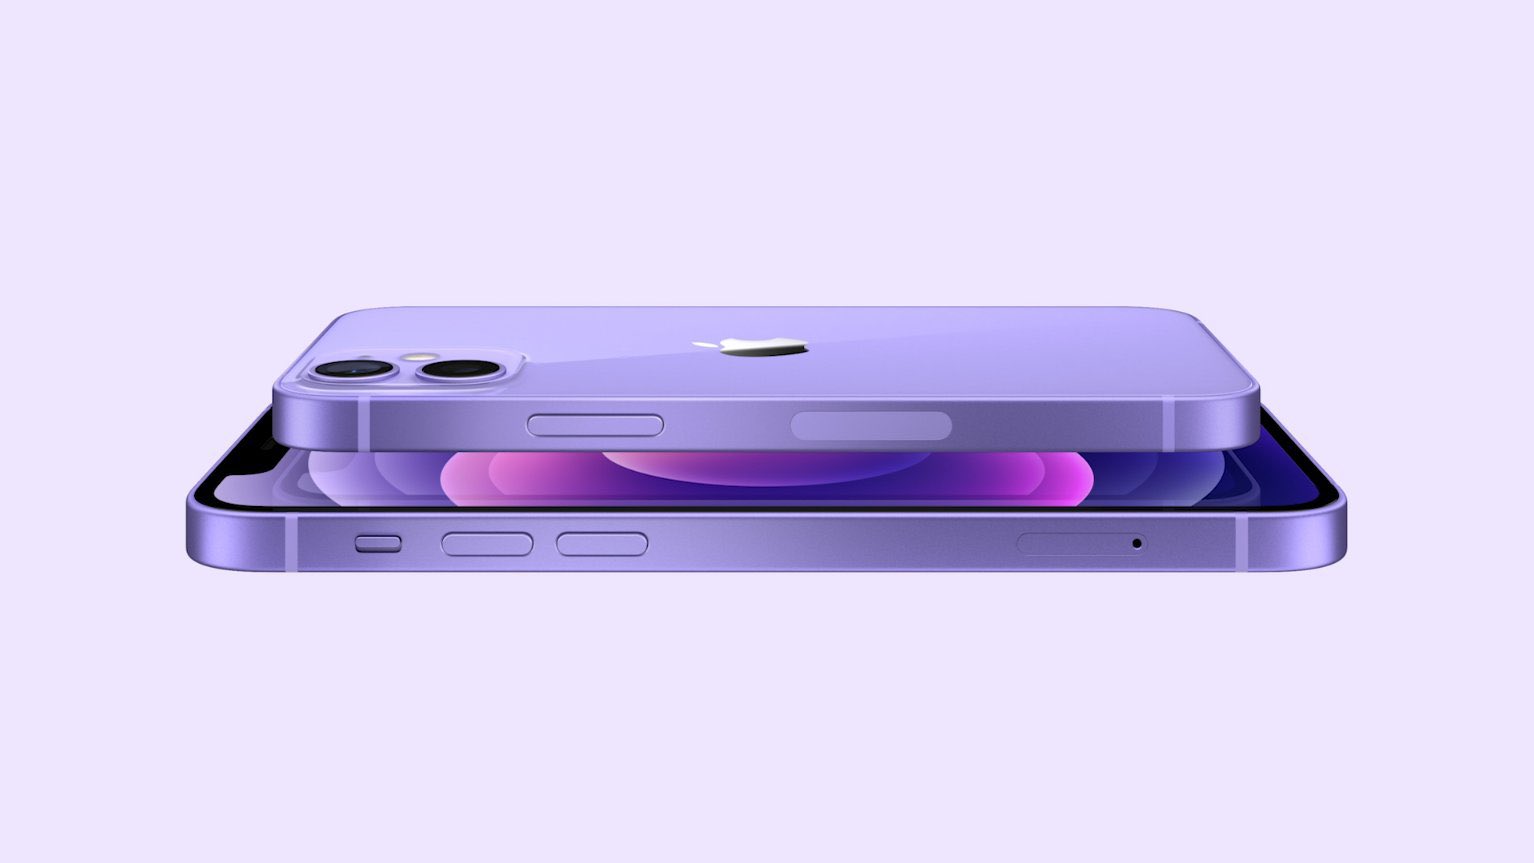 Apple iPhone 12 series is now available in a new Purple colour